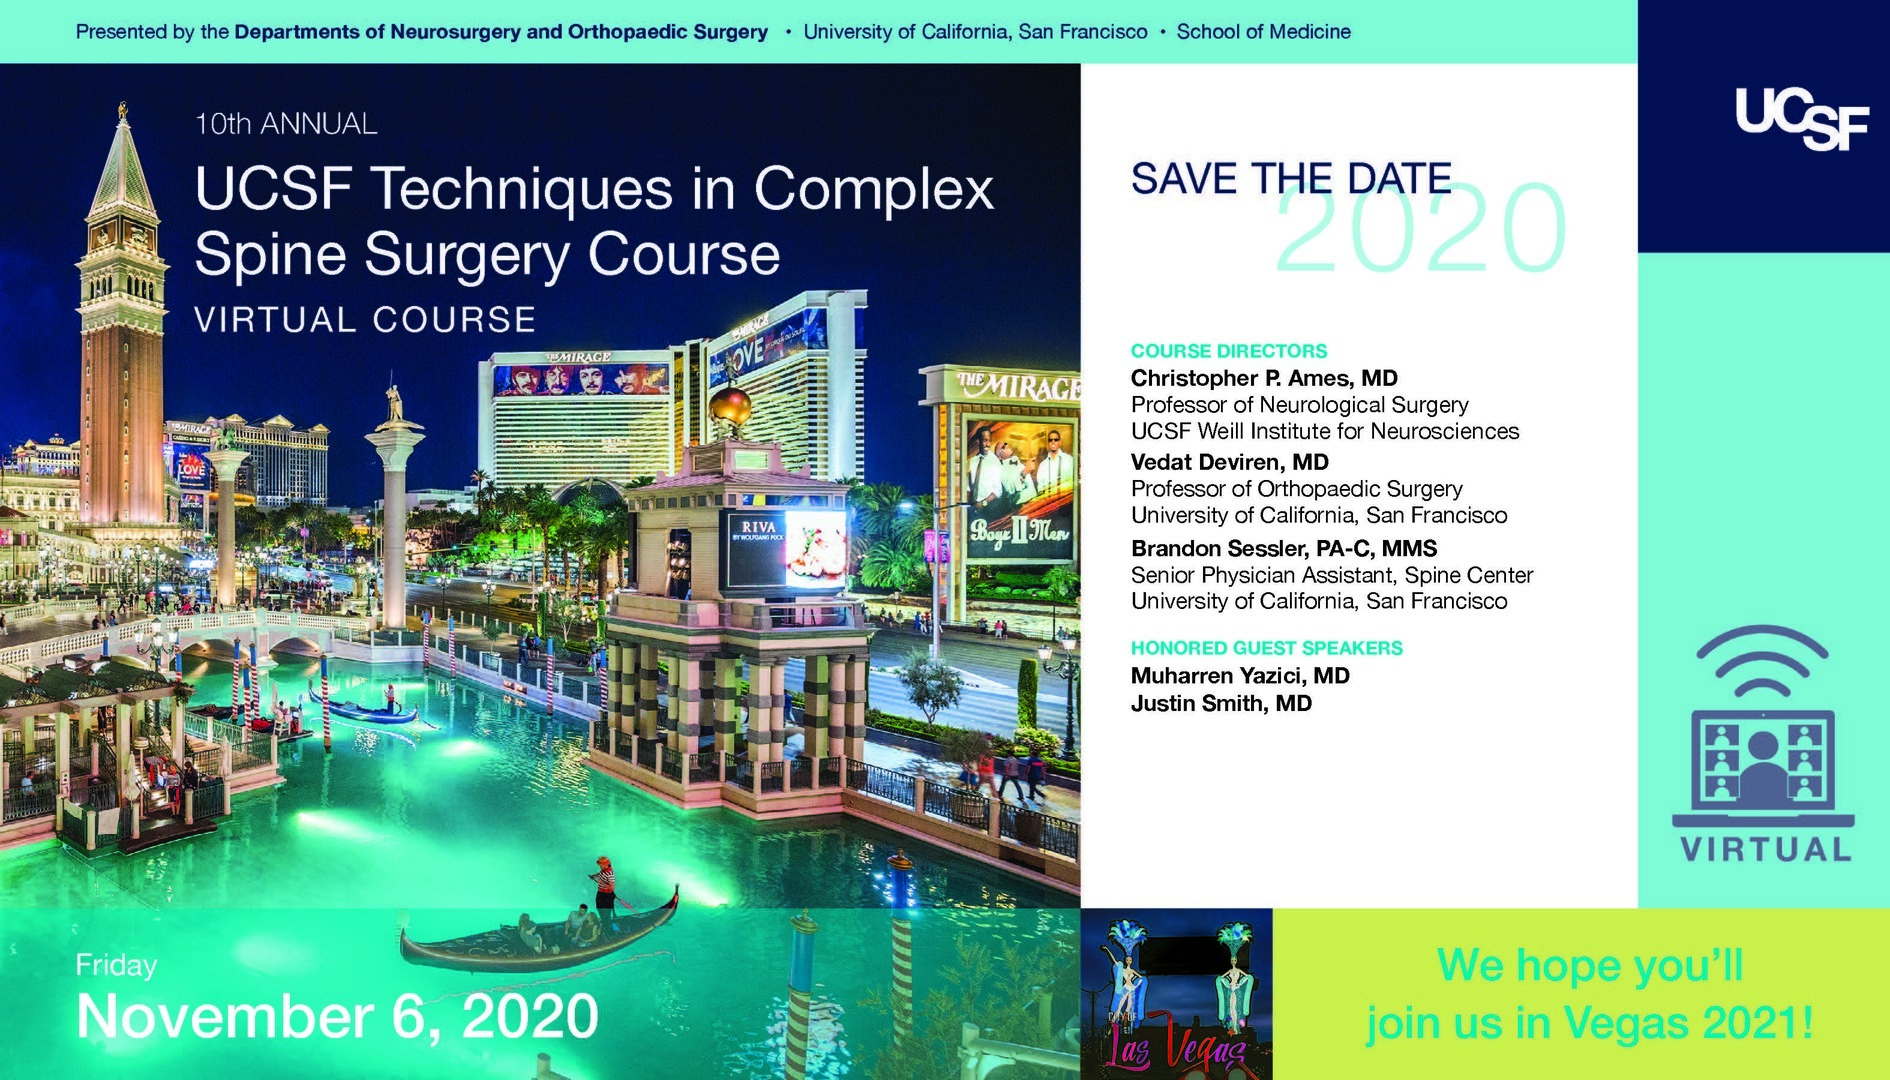 10th Annual UCSF Techniques in Complex Spine Surgery Program